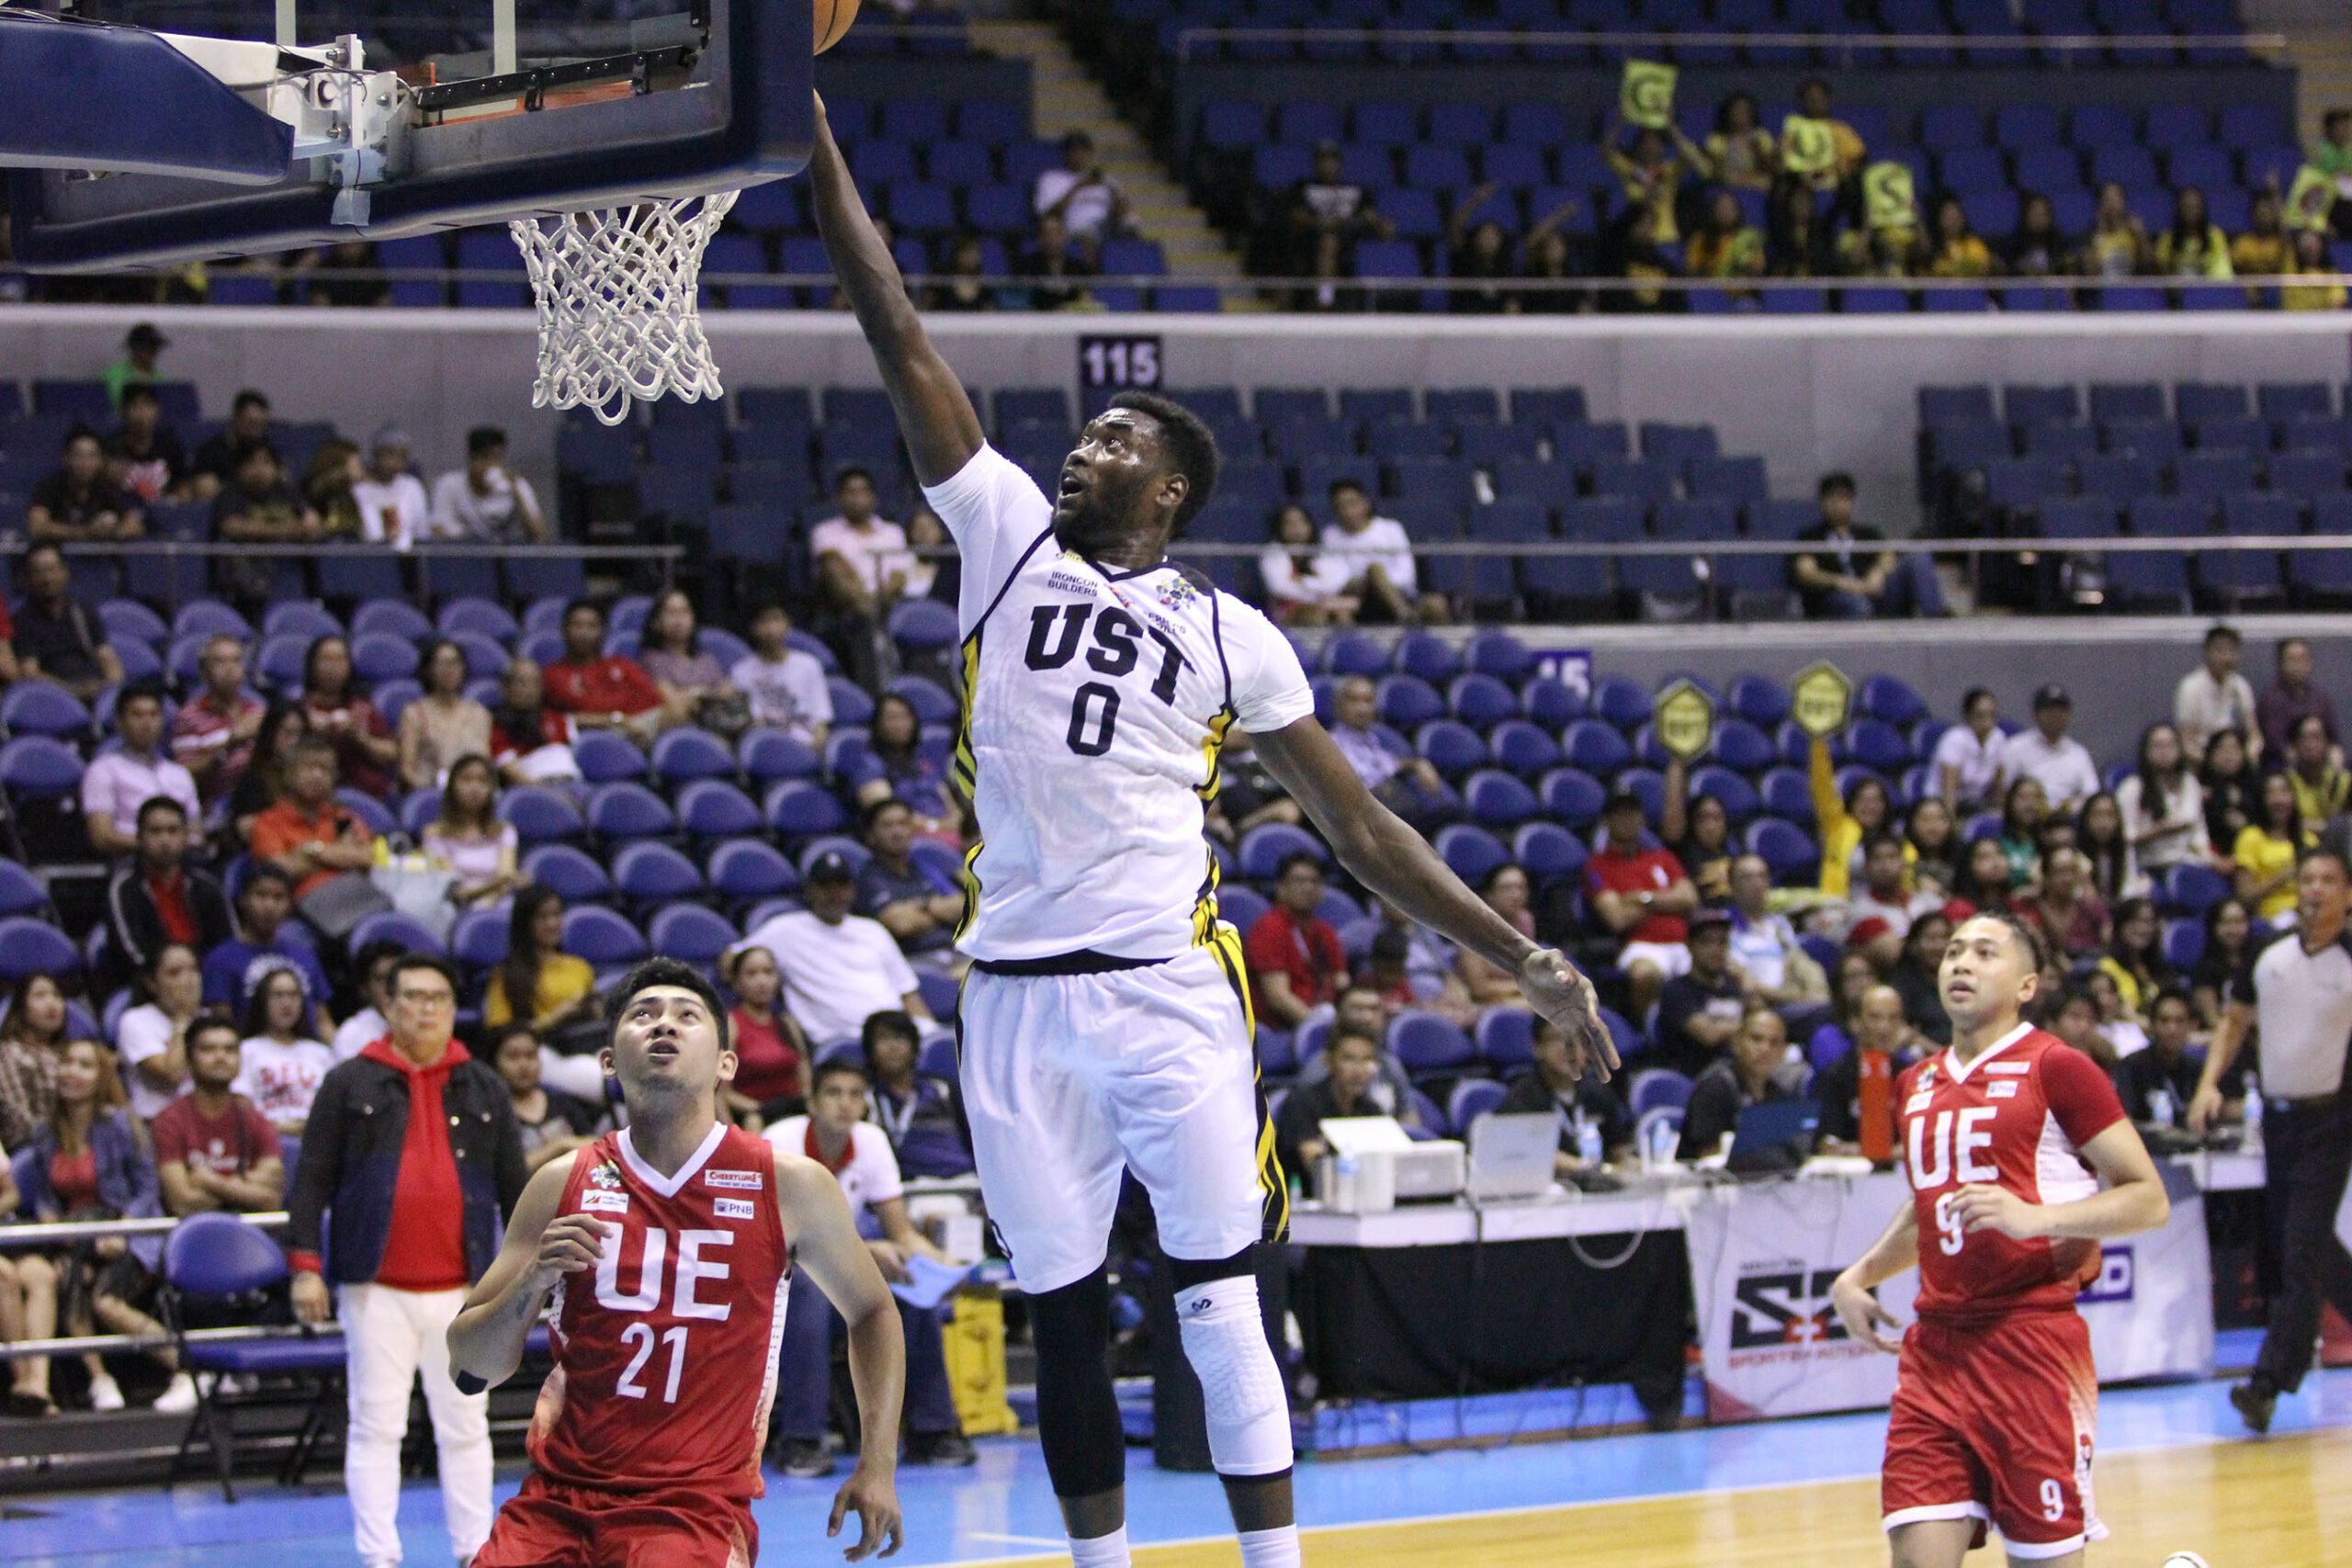 Growling Tigers snatch first win on their last S80 game against UE